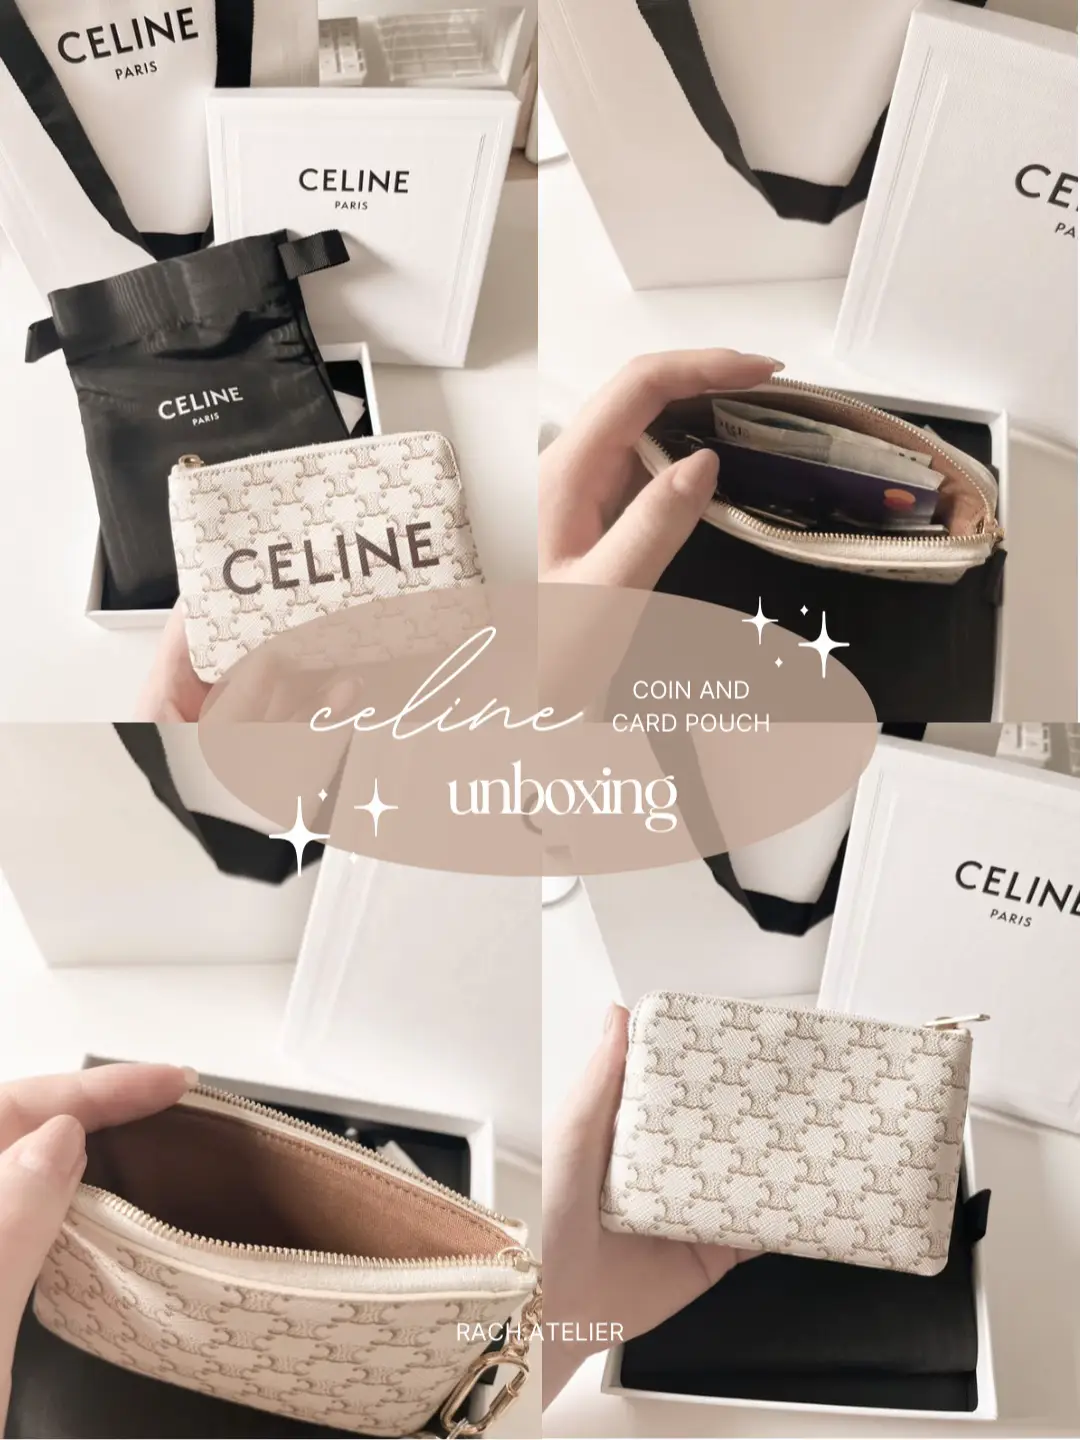 Celine Small Cabas Tote Unboxing + First Impressions 